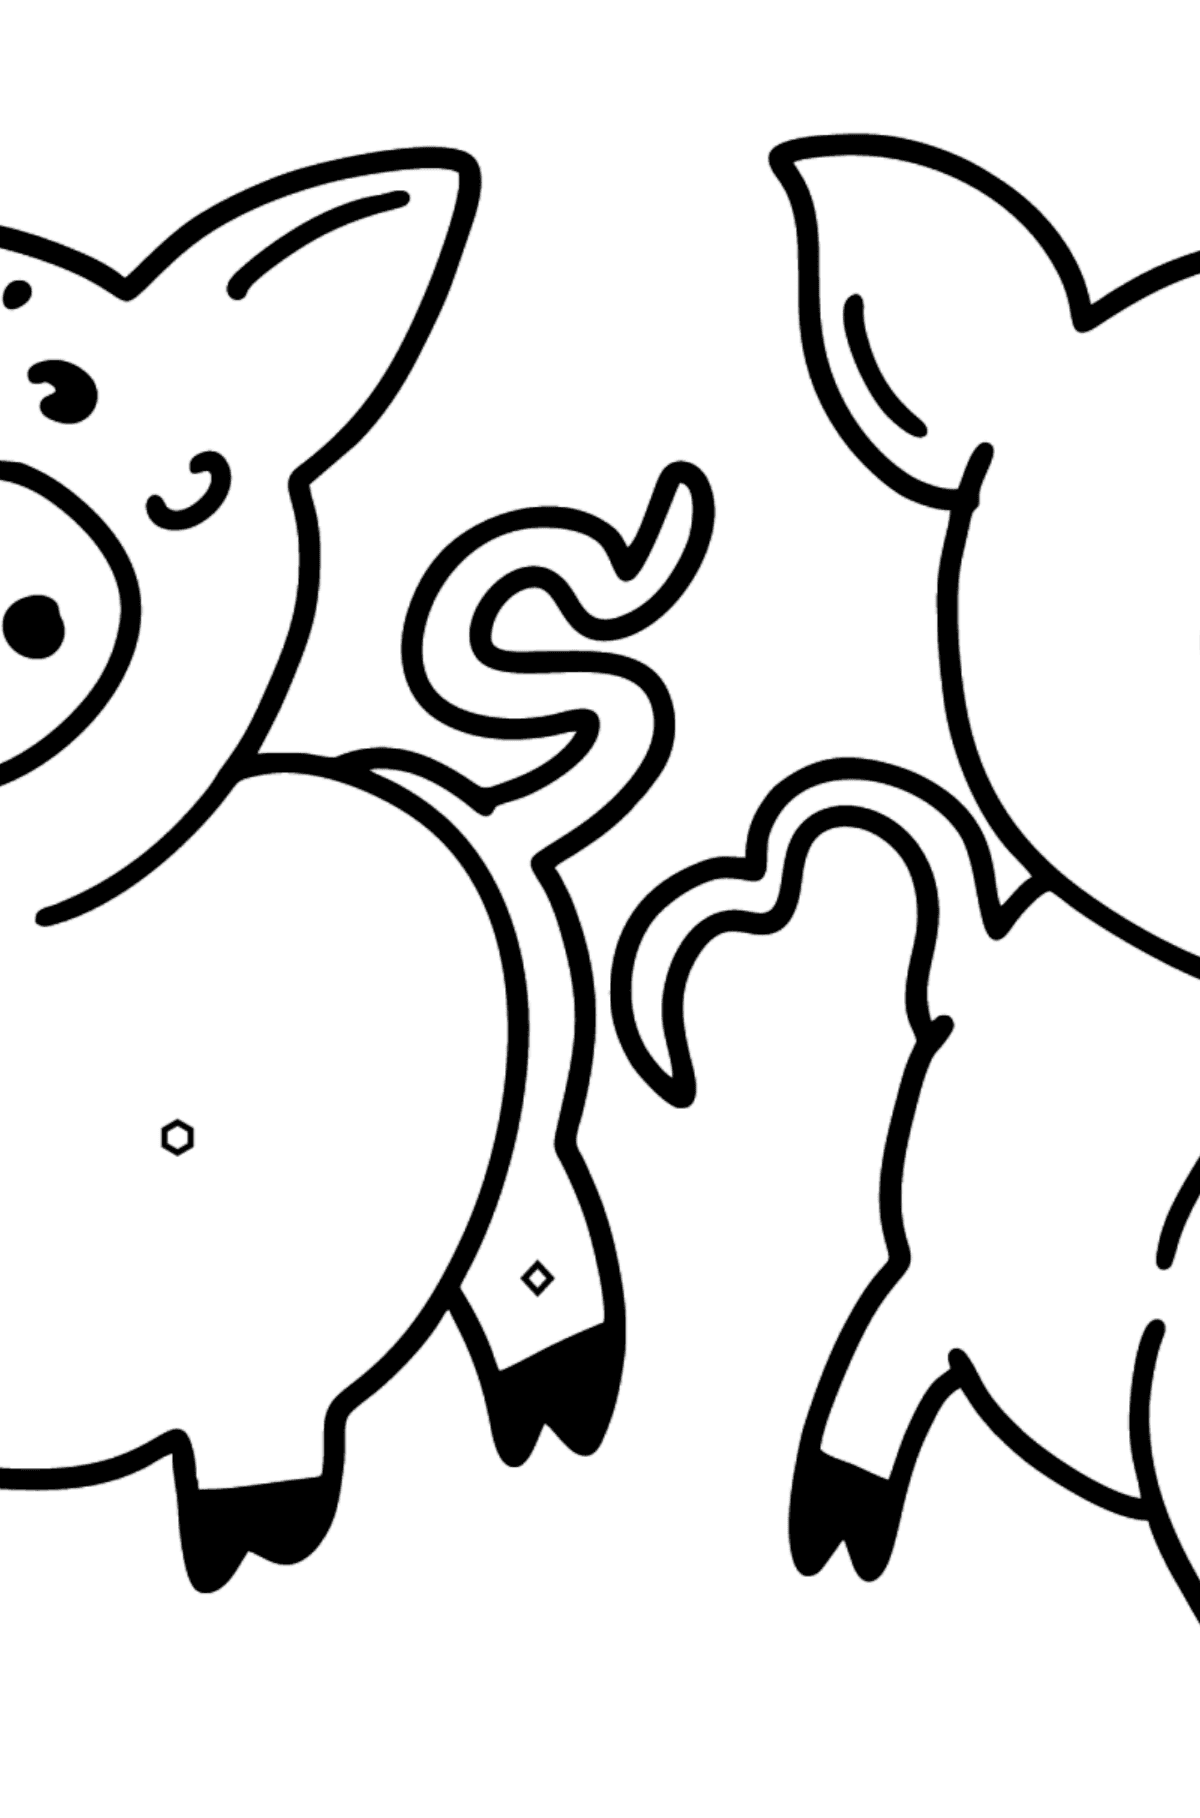 Piglets coloring page - Coloring by Geometric Shapes for Kids